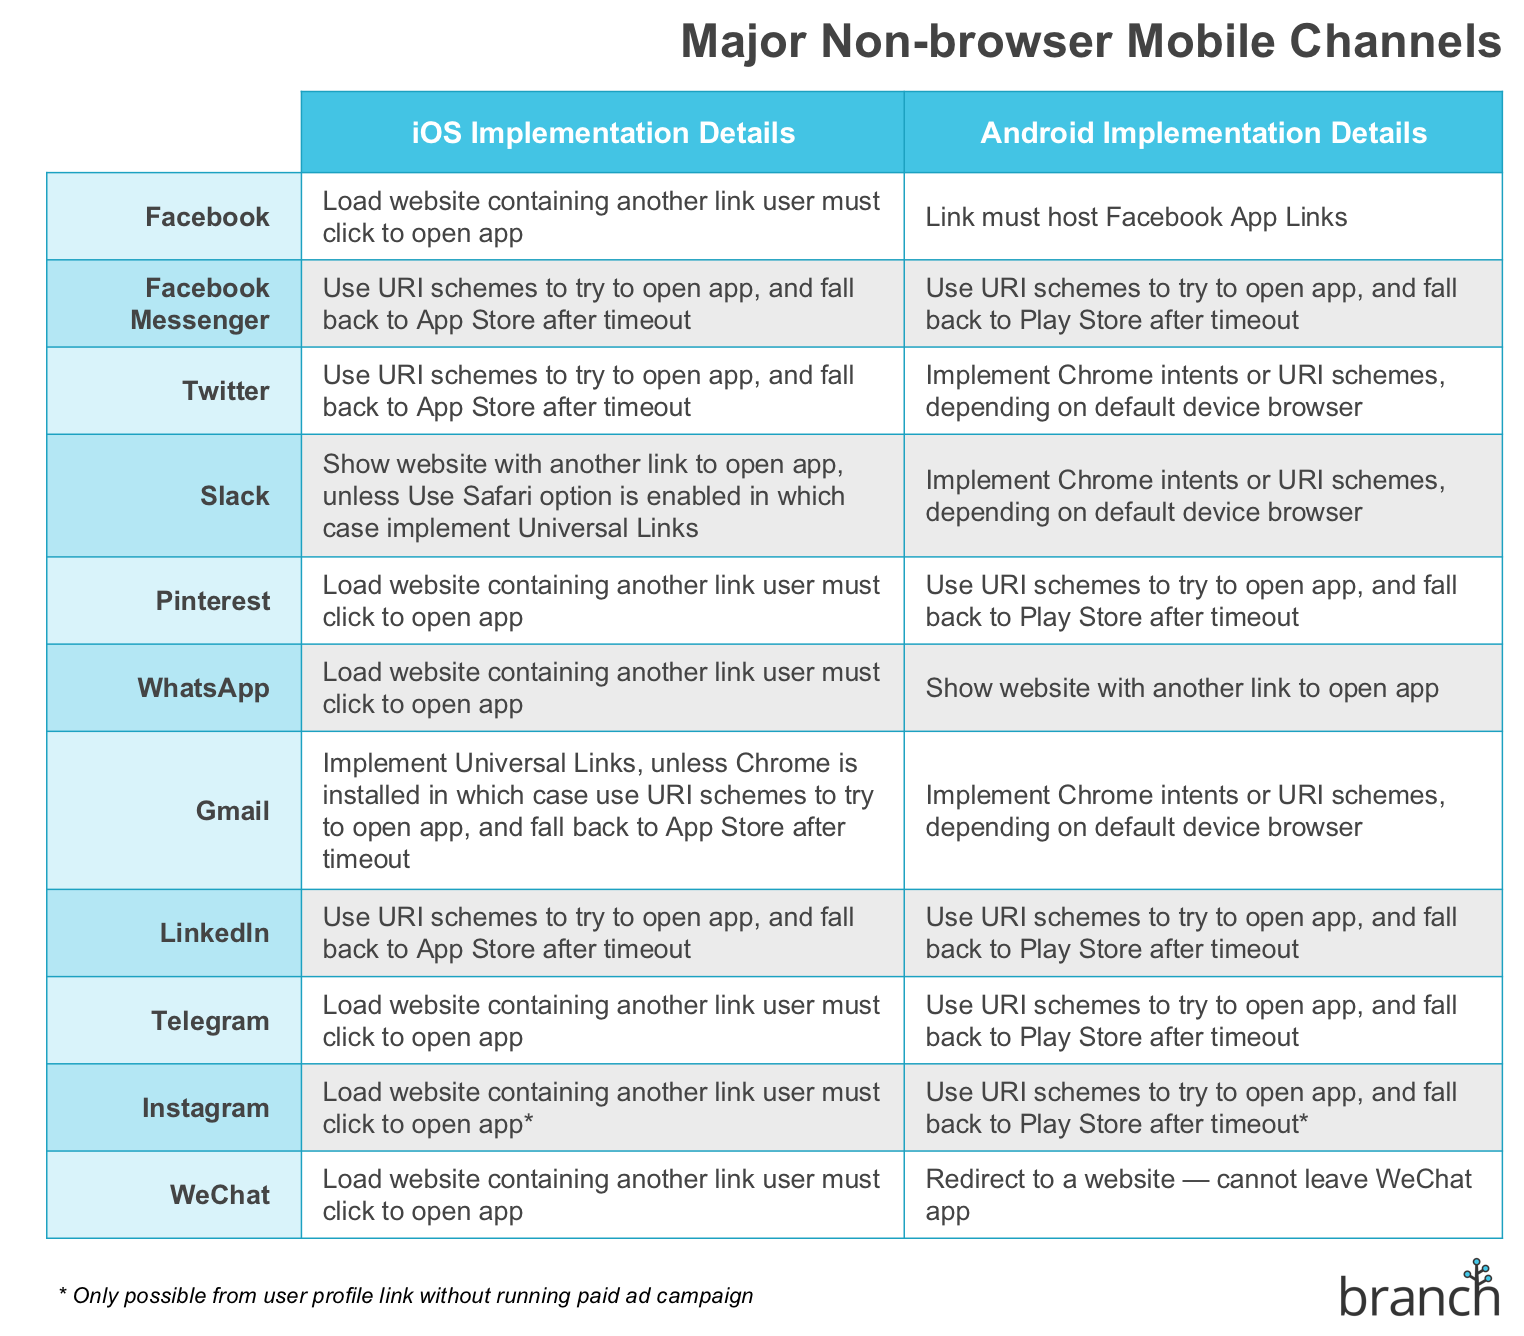 Major Non-browser Mobile Channels.png